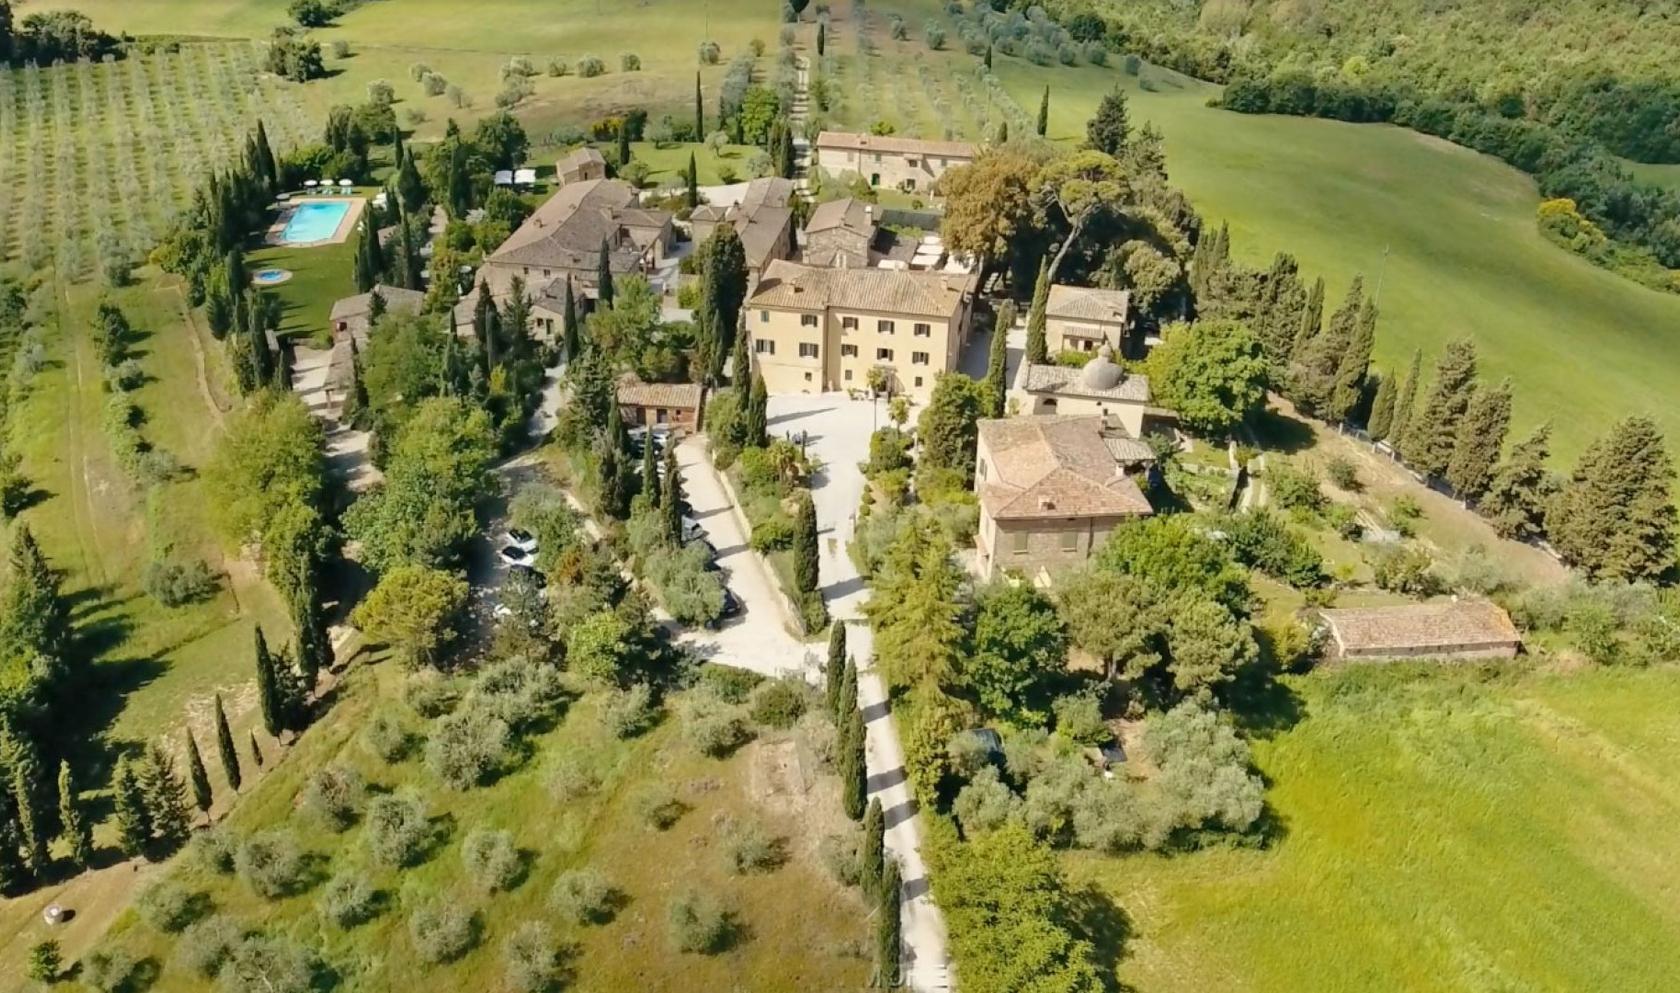 Toscana Immobiliare - Luxury real estate in Italy